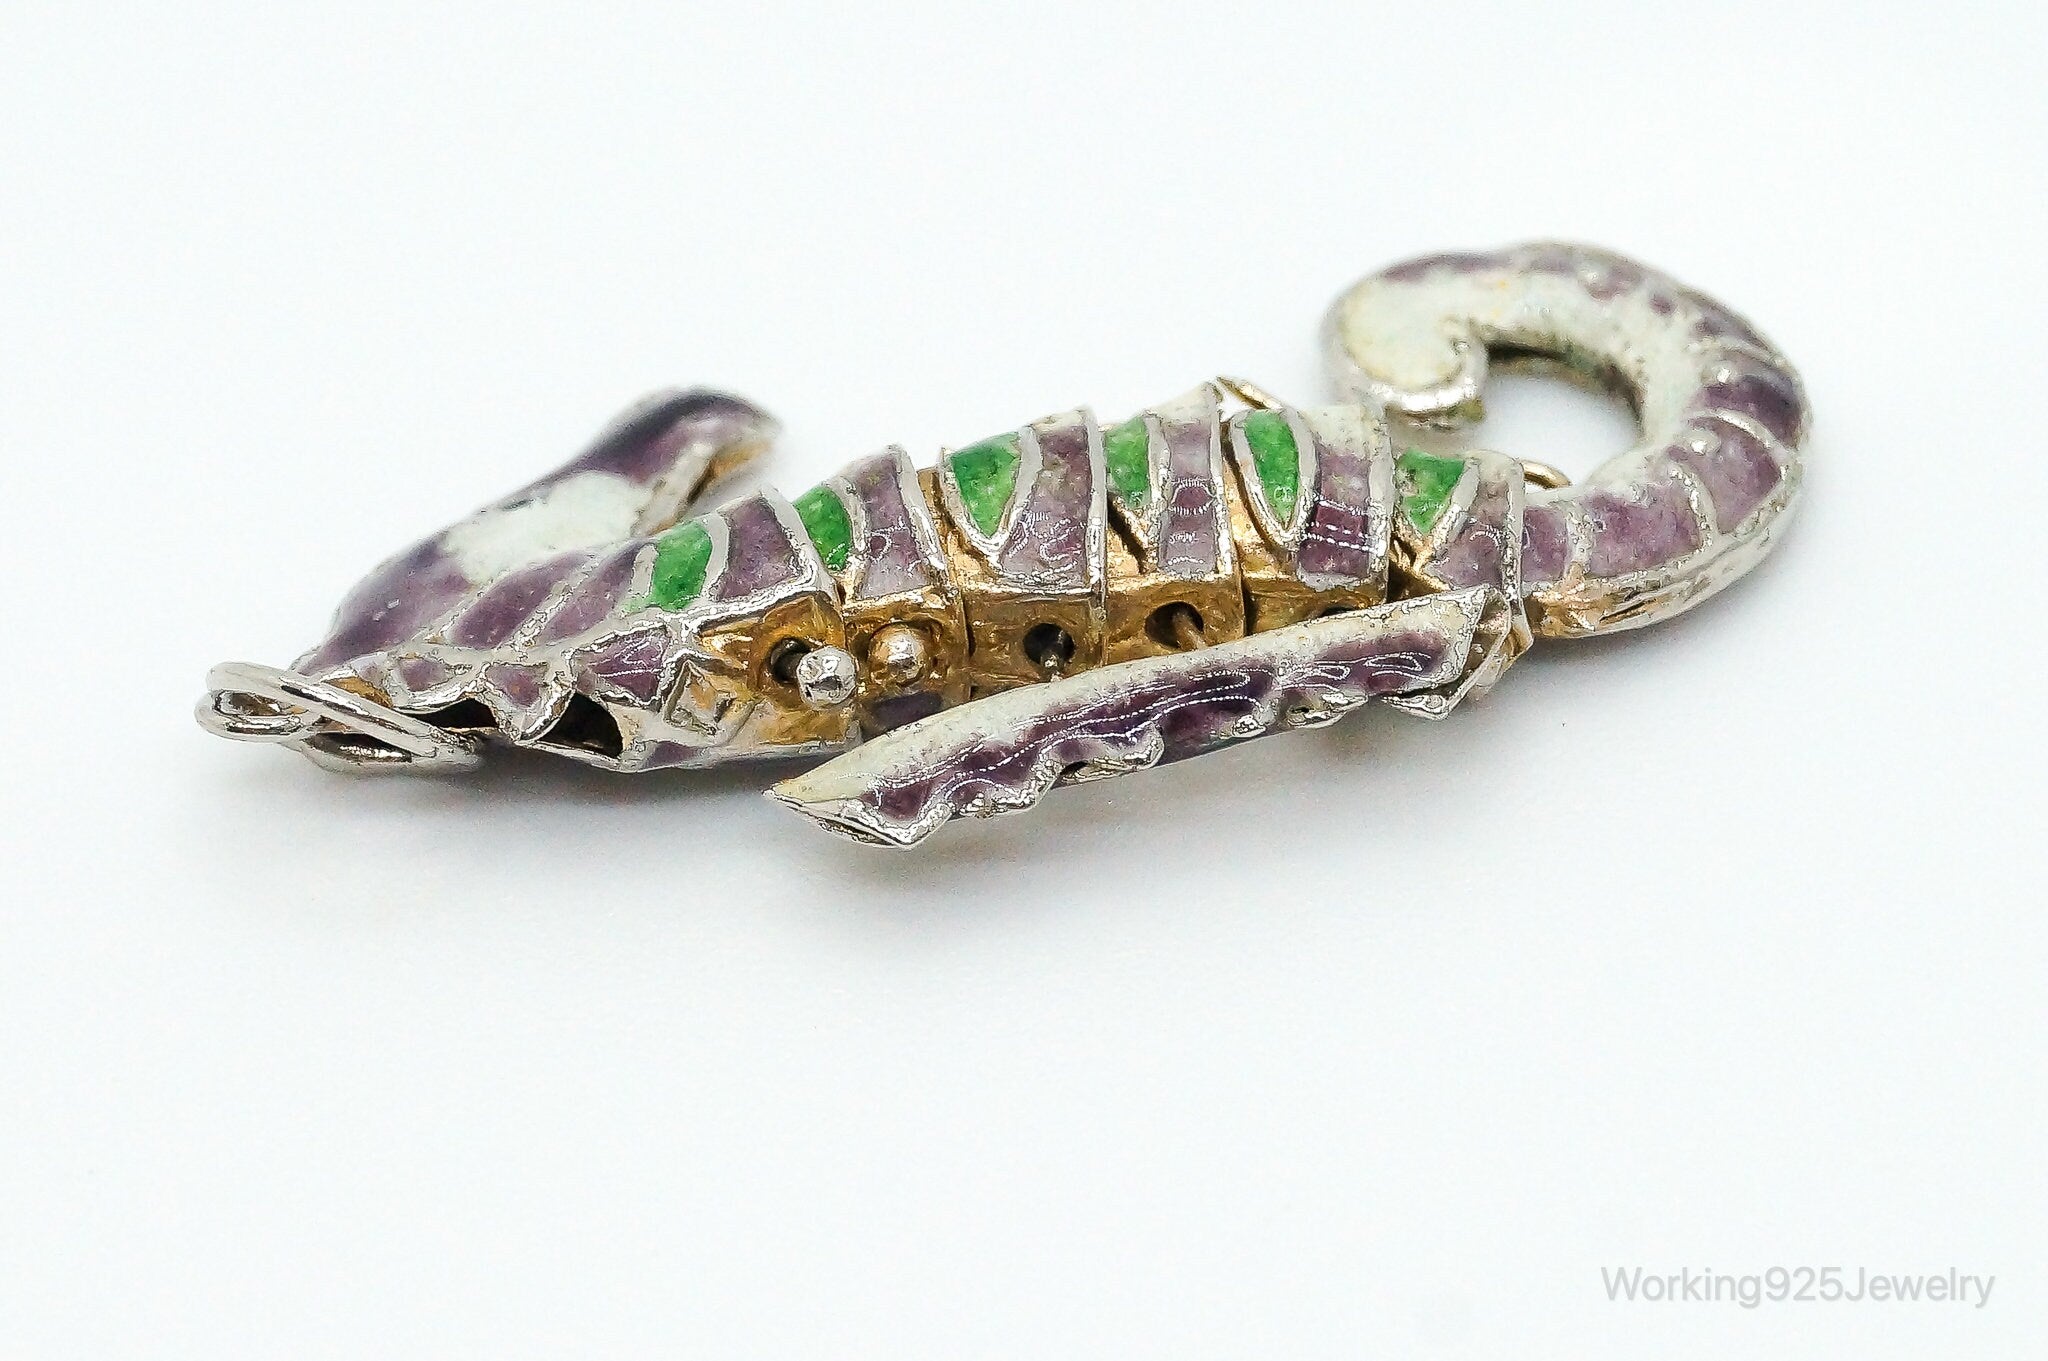 Antique Chinese Articulated Cloisonne Enameled Vermeil Silver Seahorse Pendant